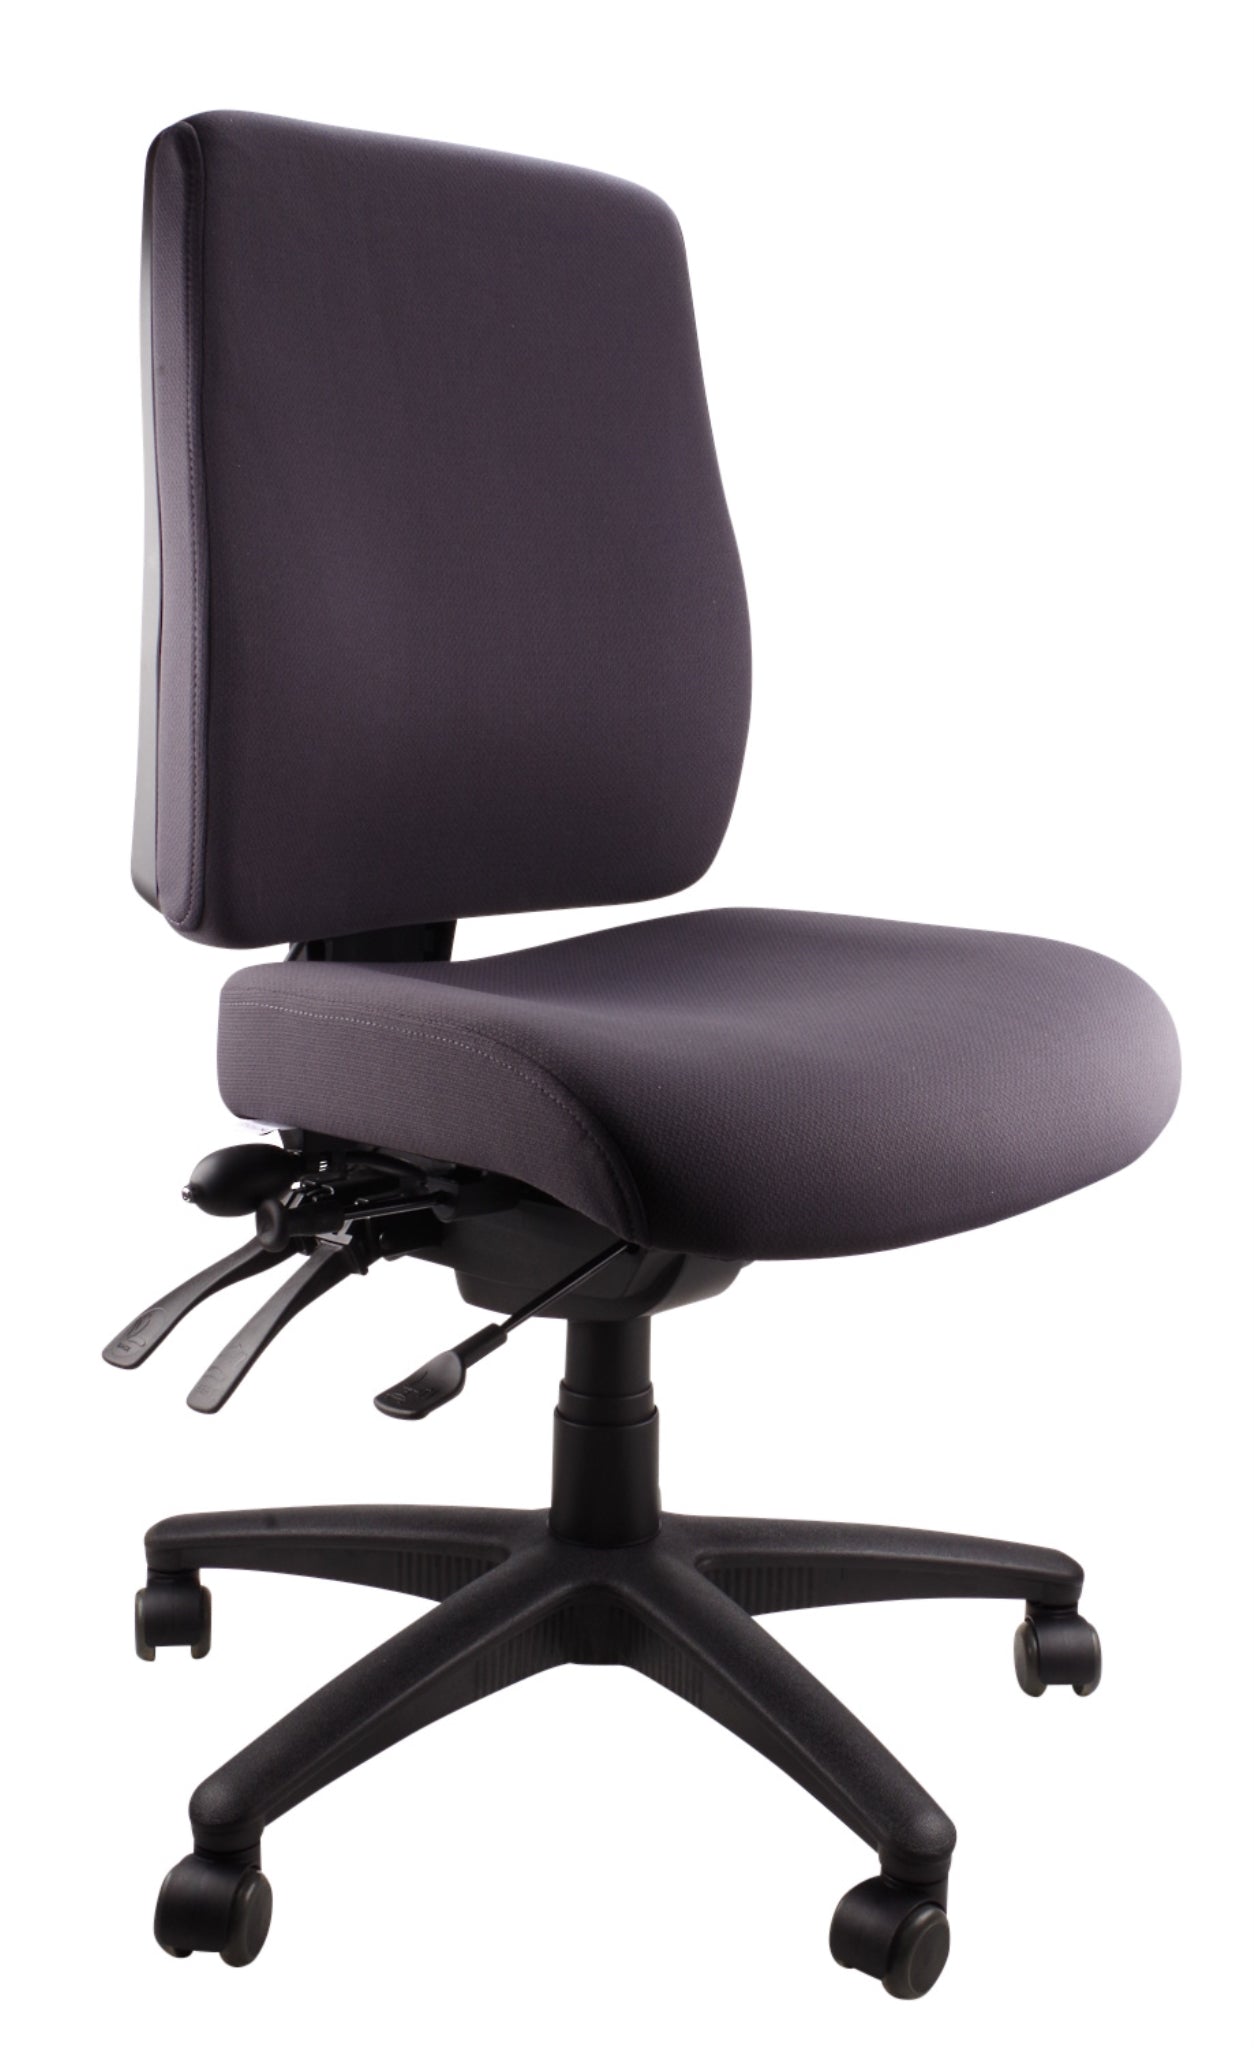 Buy Quality Ergo Air Ergonomic Office Desk Chair Now with FREE SHIPPING Charcoal 